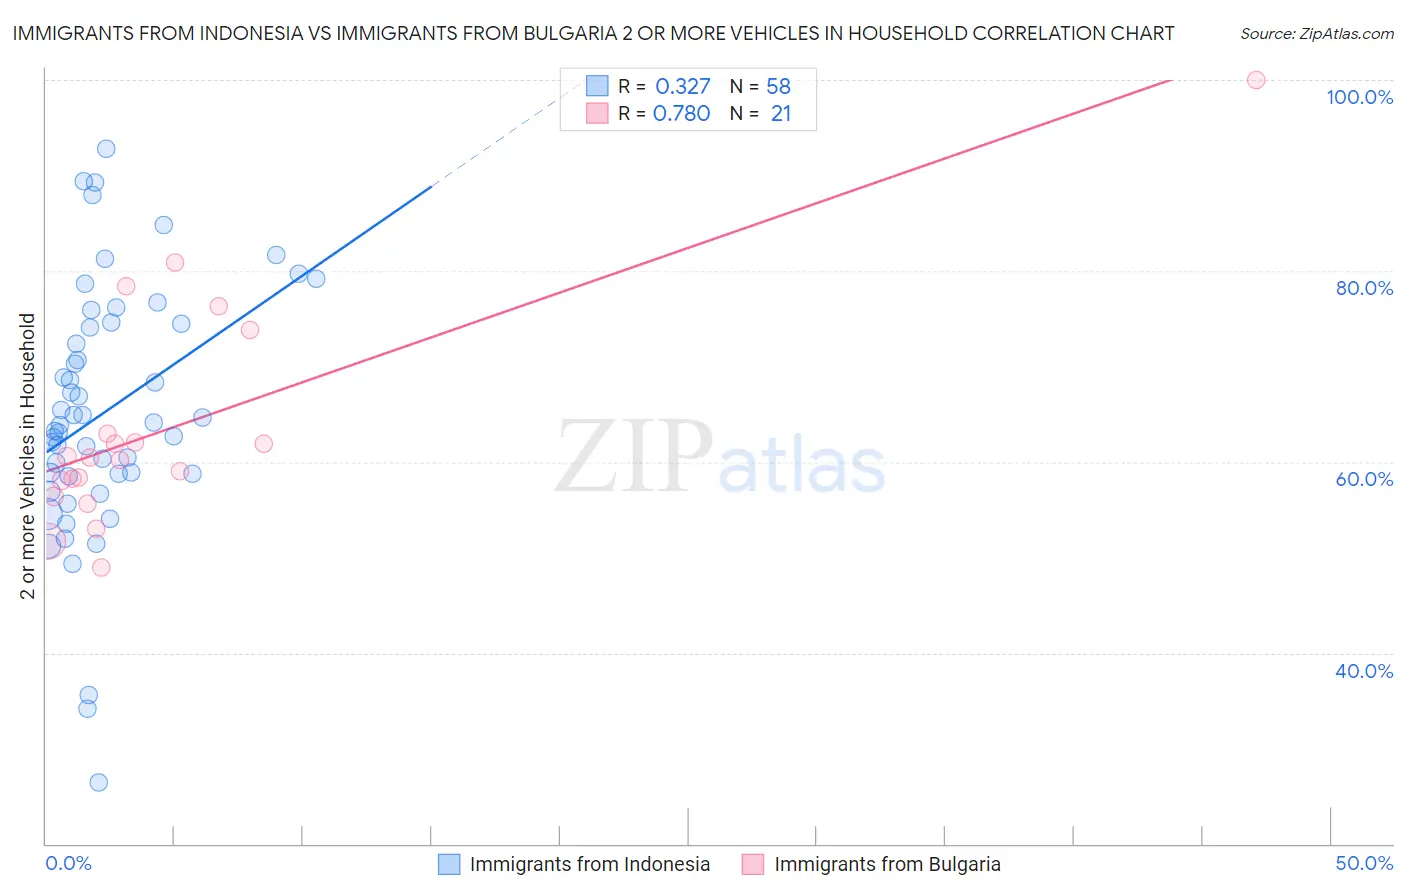 Immigrants from Indonesia vs Immigrants from Bulgaria 2 or more Vehicles in Household